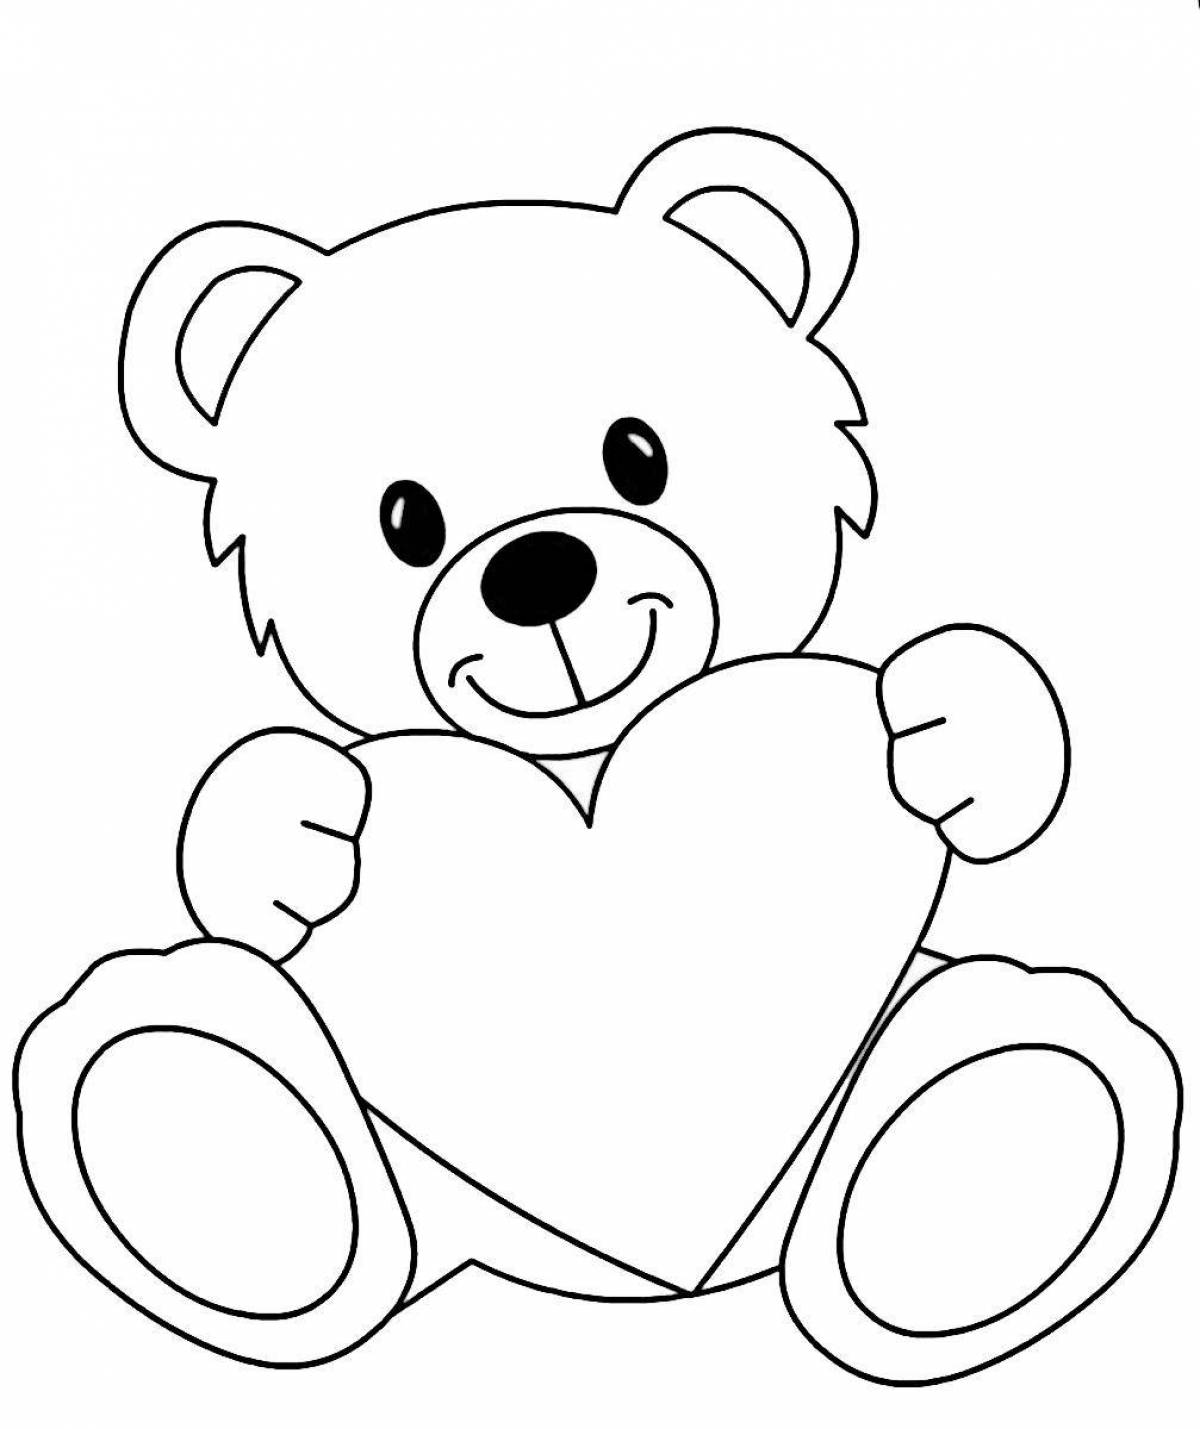 Blessed teddy bear with heart coloring page